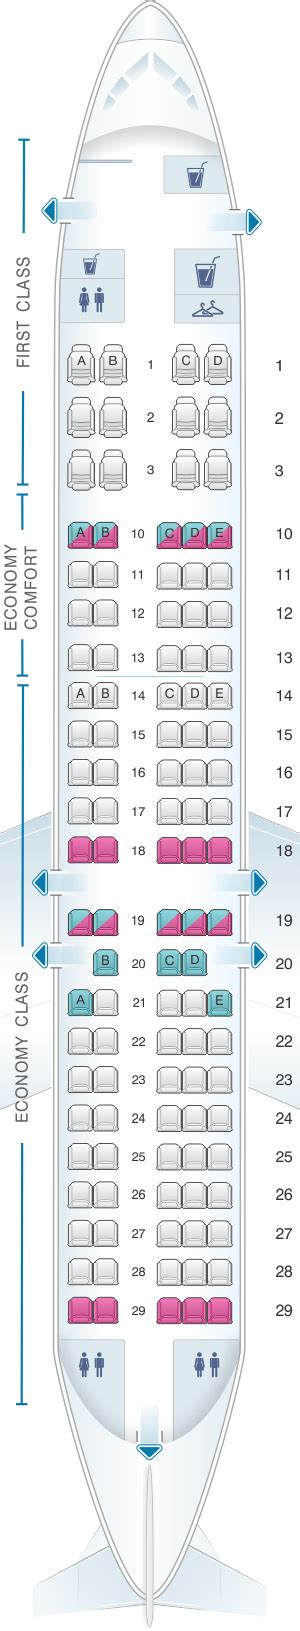 Wheelchair accessible lavatory location(s): Behind Row 39, Seats DEF; Movable armrest locations: Delta One: 1C, 2 ABD, 3C, 4 ABD, 5C, 6 ABD, 7C, 8 ABD, 9C * Delta Premium Select: 21 - 25 BDGH; Delta Comfort+: …